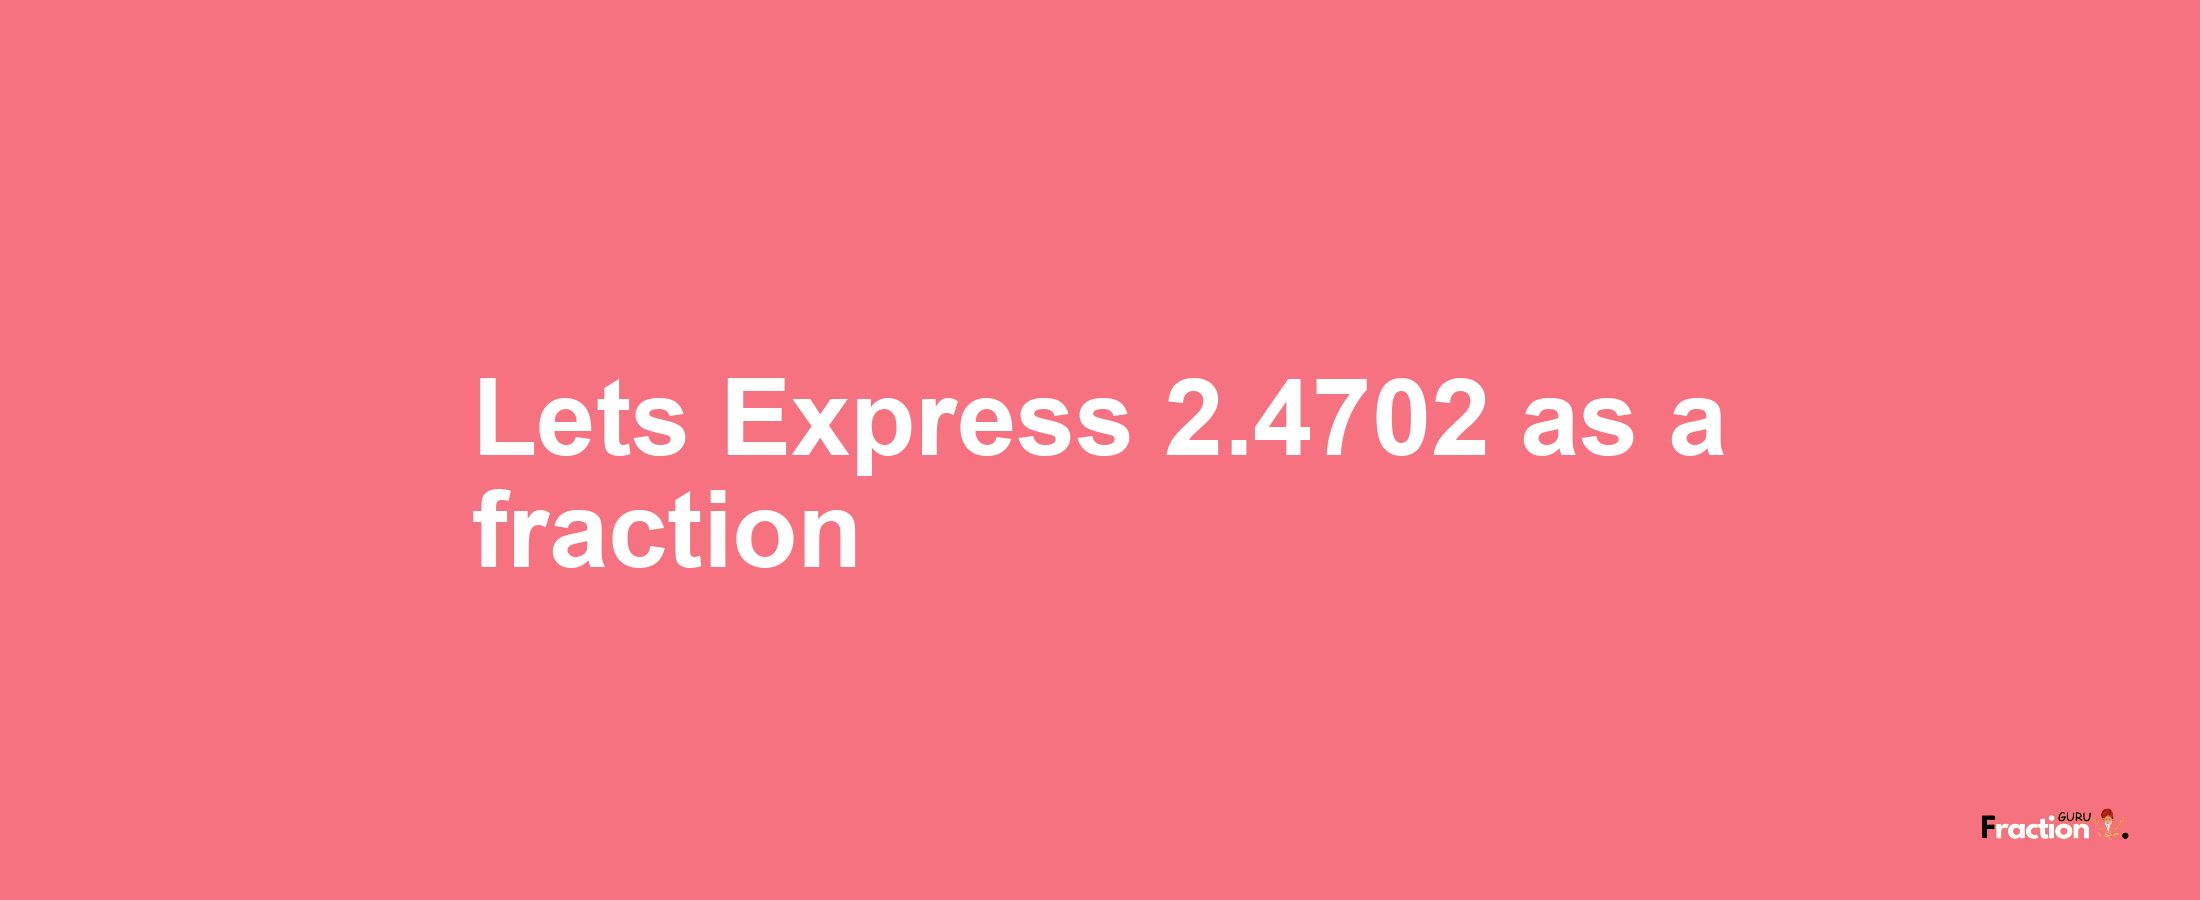 Lets Express 2.4702 as afraction